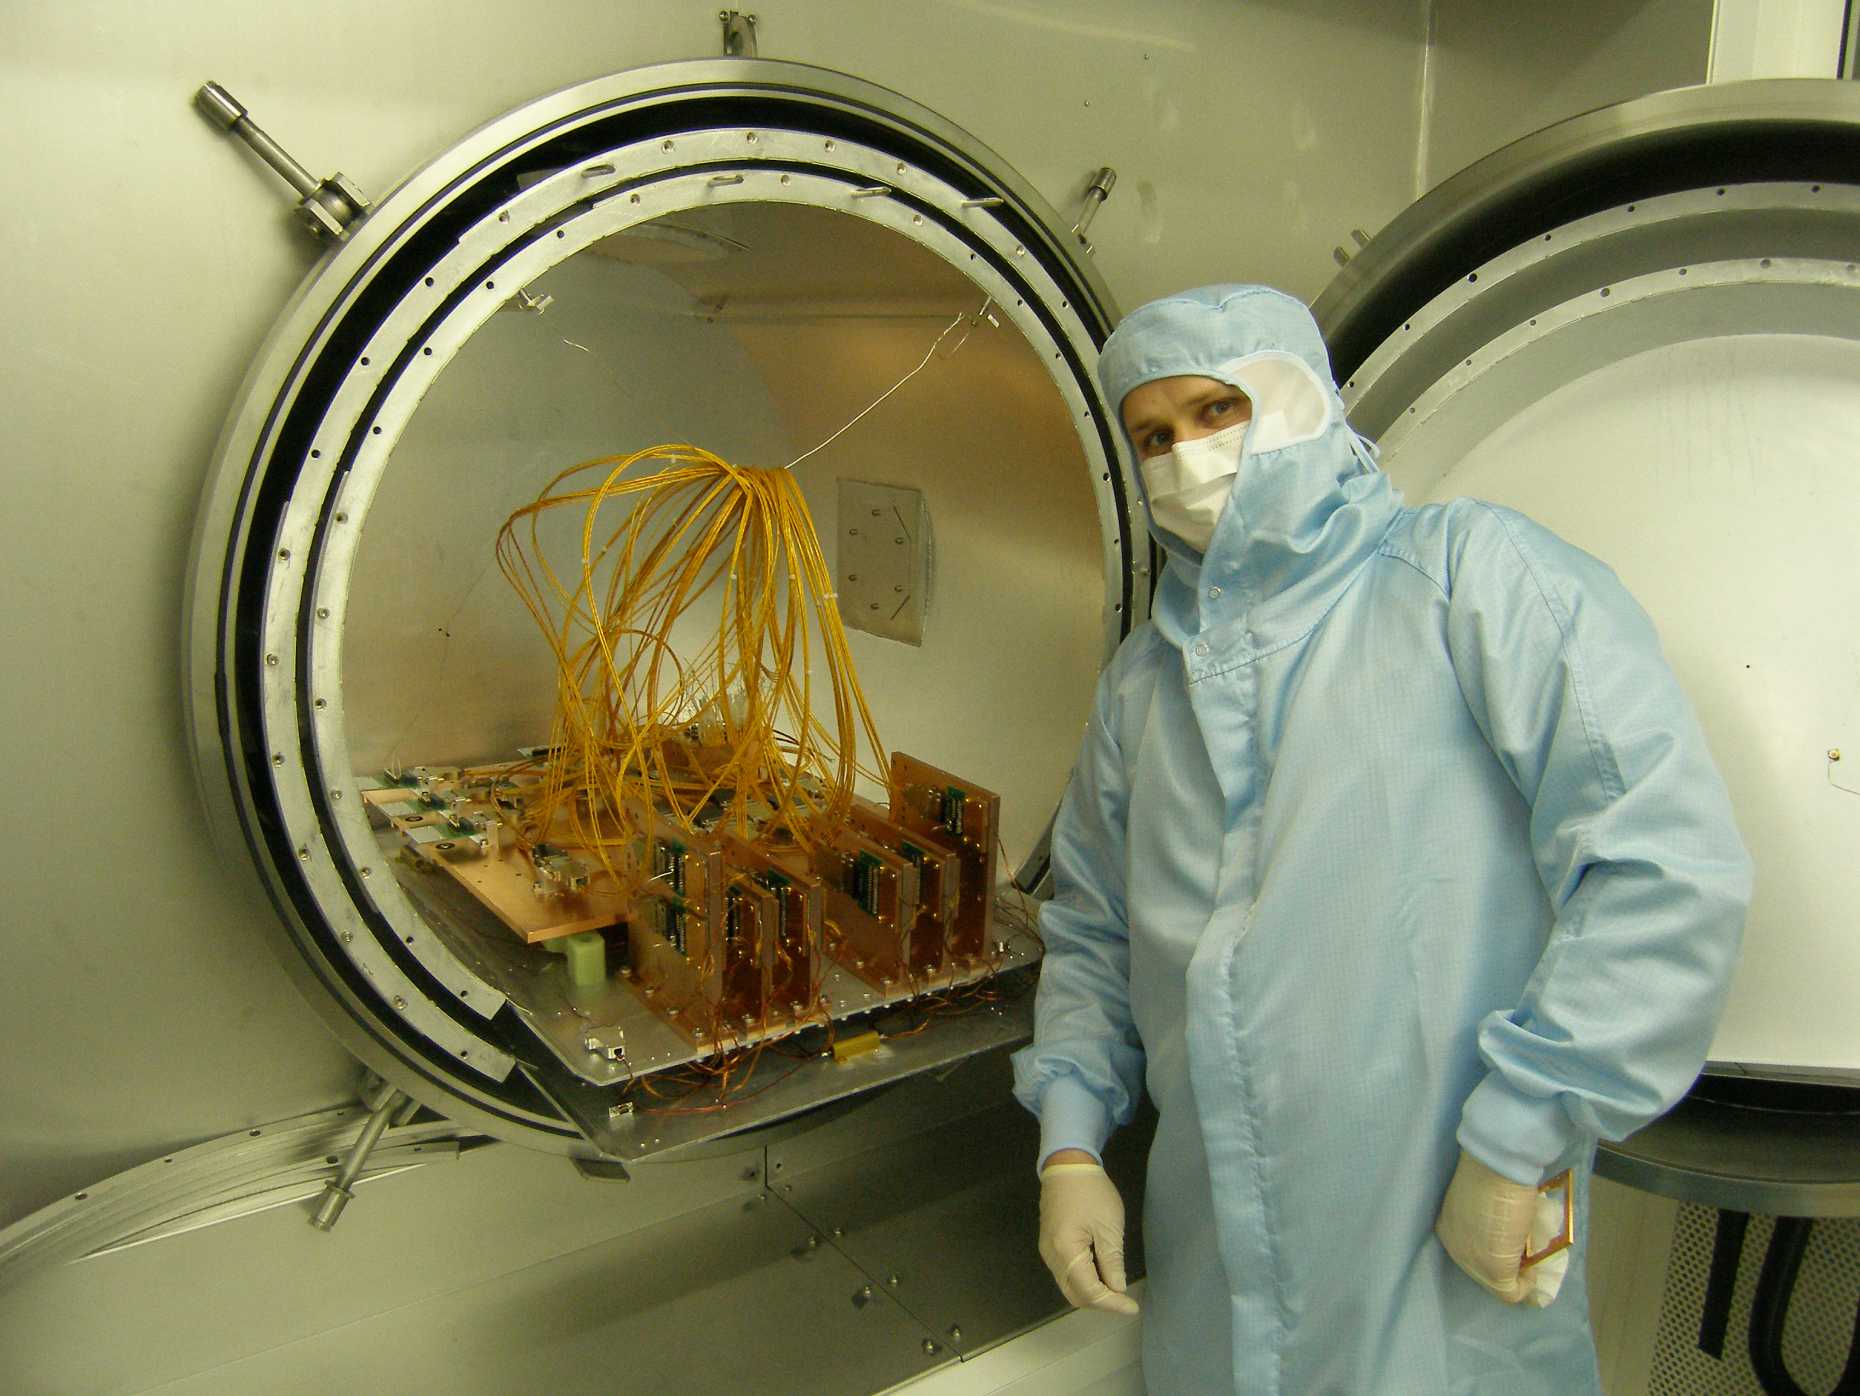 Enlarged view: Cryotest facility at PSI equipped with the SYDERAL cables ready for cryogenic performance testing (Image: MIRI)